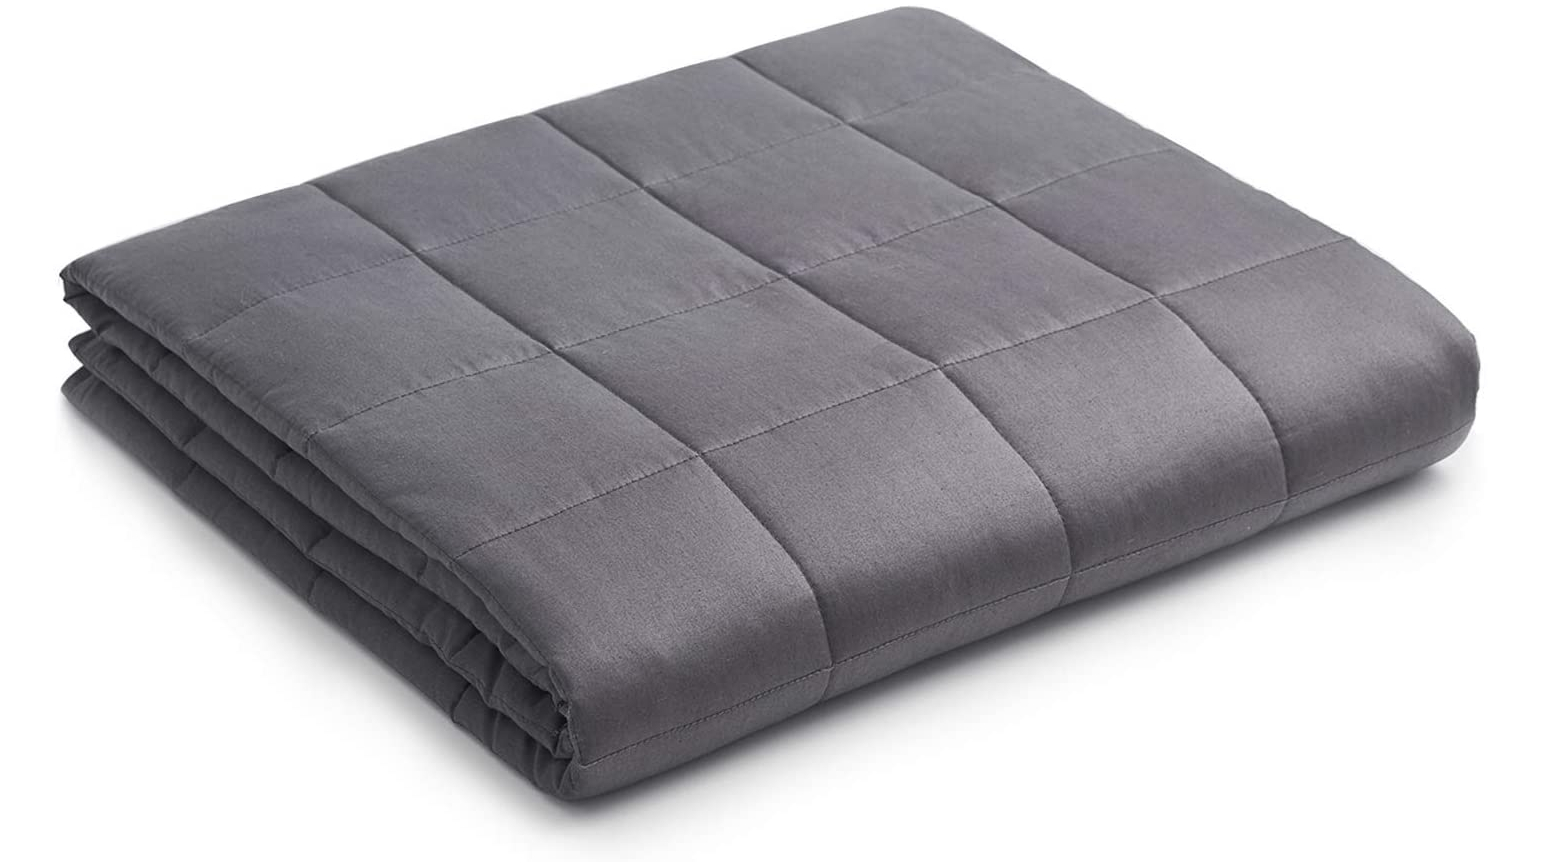 YNM Weighted Blanket